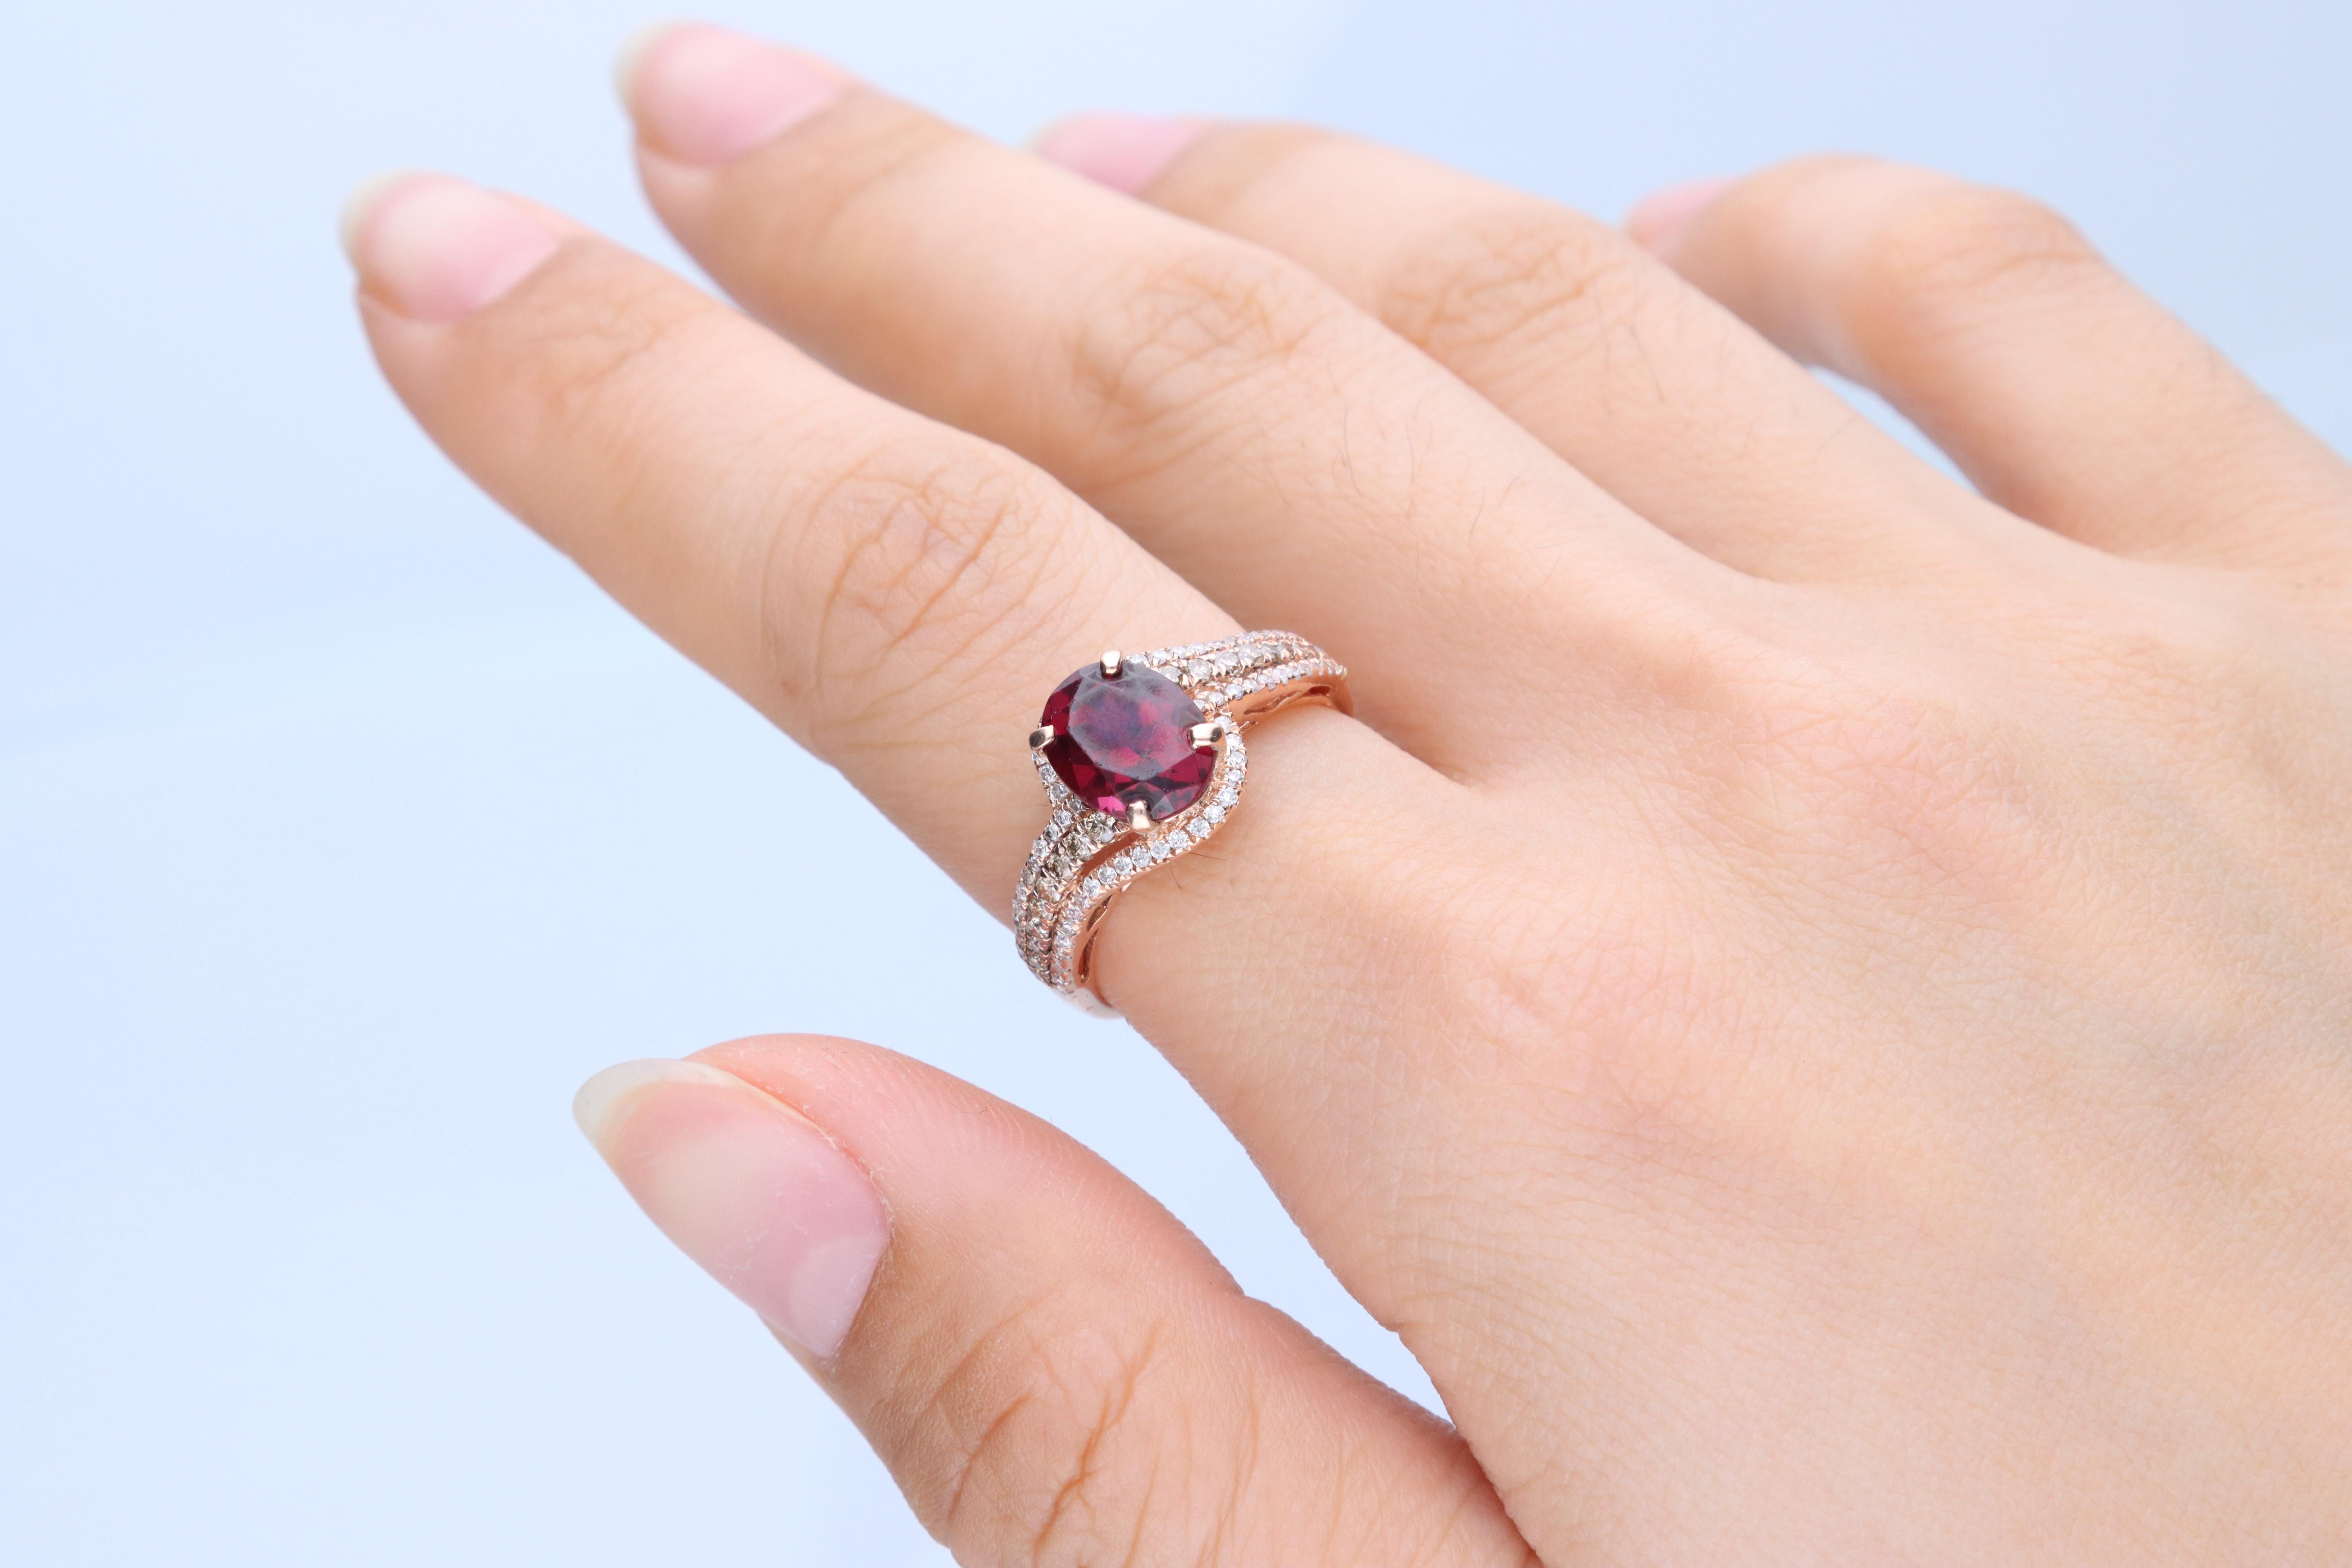 Stunning, timeless and classy eternity Unique Ring. Decorate yourself in luxury with this Gin & Grace Ring. The 10K Rose Gold jewelry boasts Oval-Cut Prong Setting Purplish Pink Natural Garnet (1 pcs) 2.31 Carat, along with Natural Round cut white